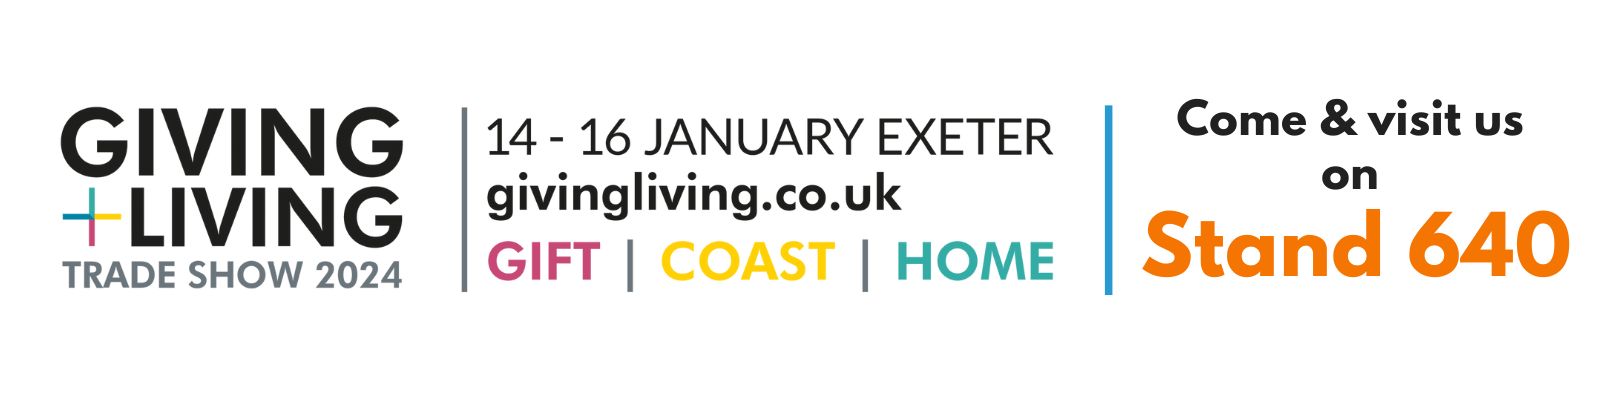 Come and see us at Giving and Living Trade Show 2024